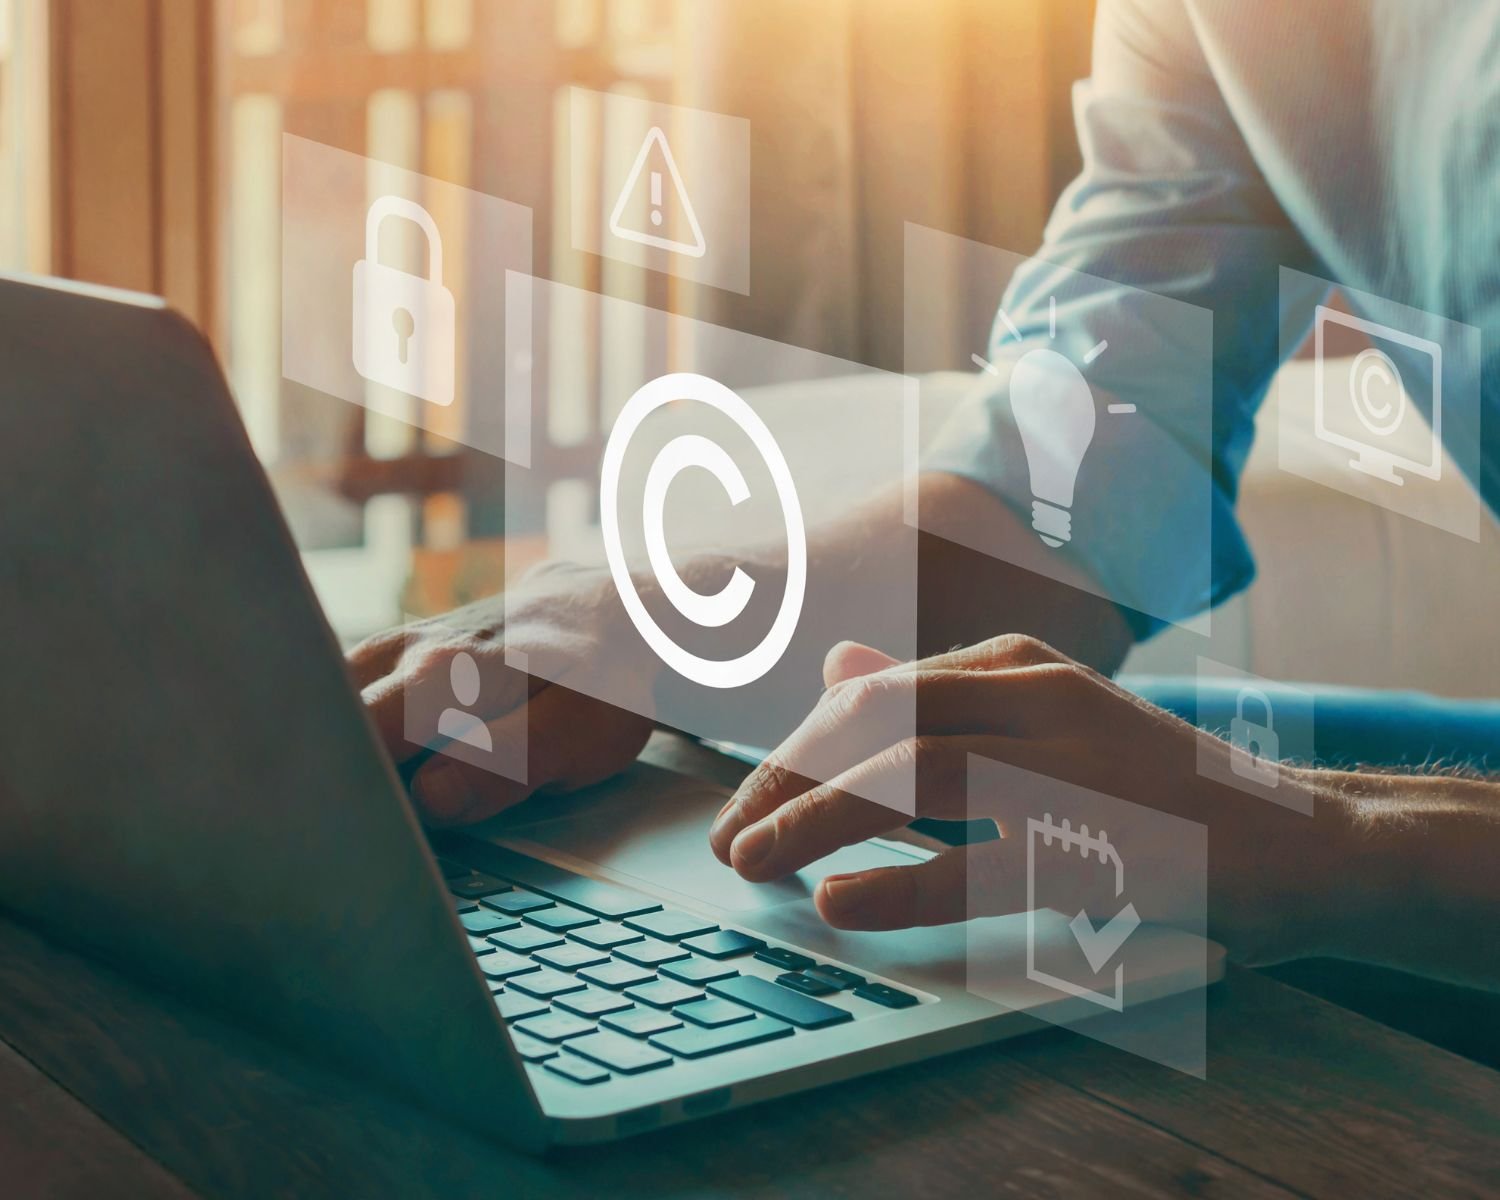 Everything you need to know about copyright ©: what is it and how does it work?